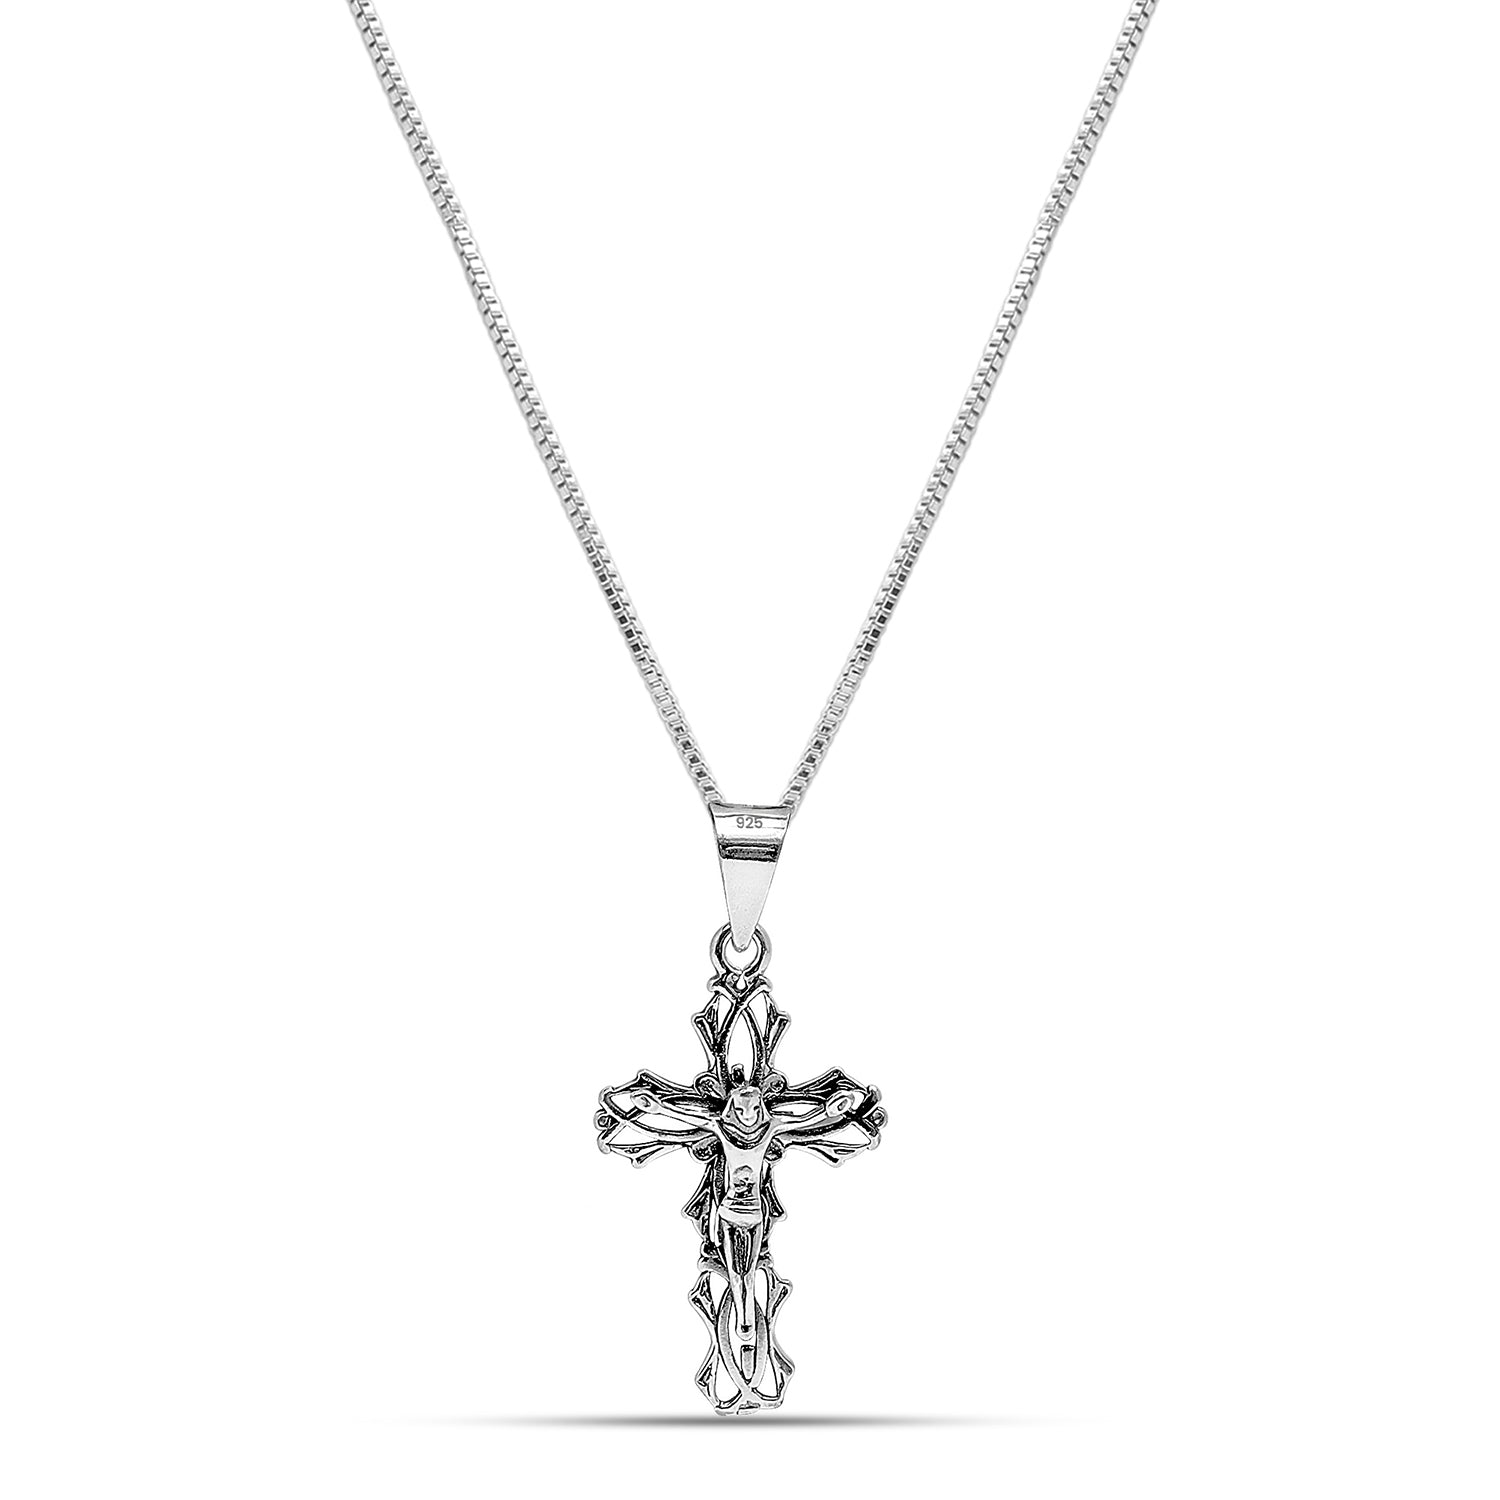 925 Sterling Silver Oxidized Cross Pendant Necklace for Men and Women